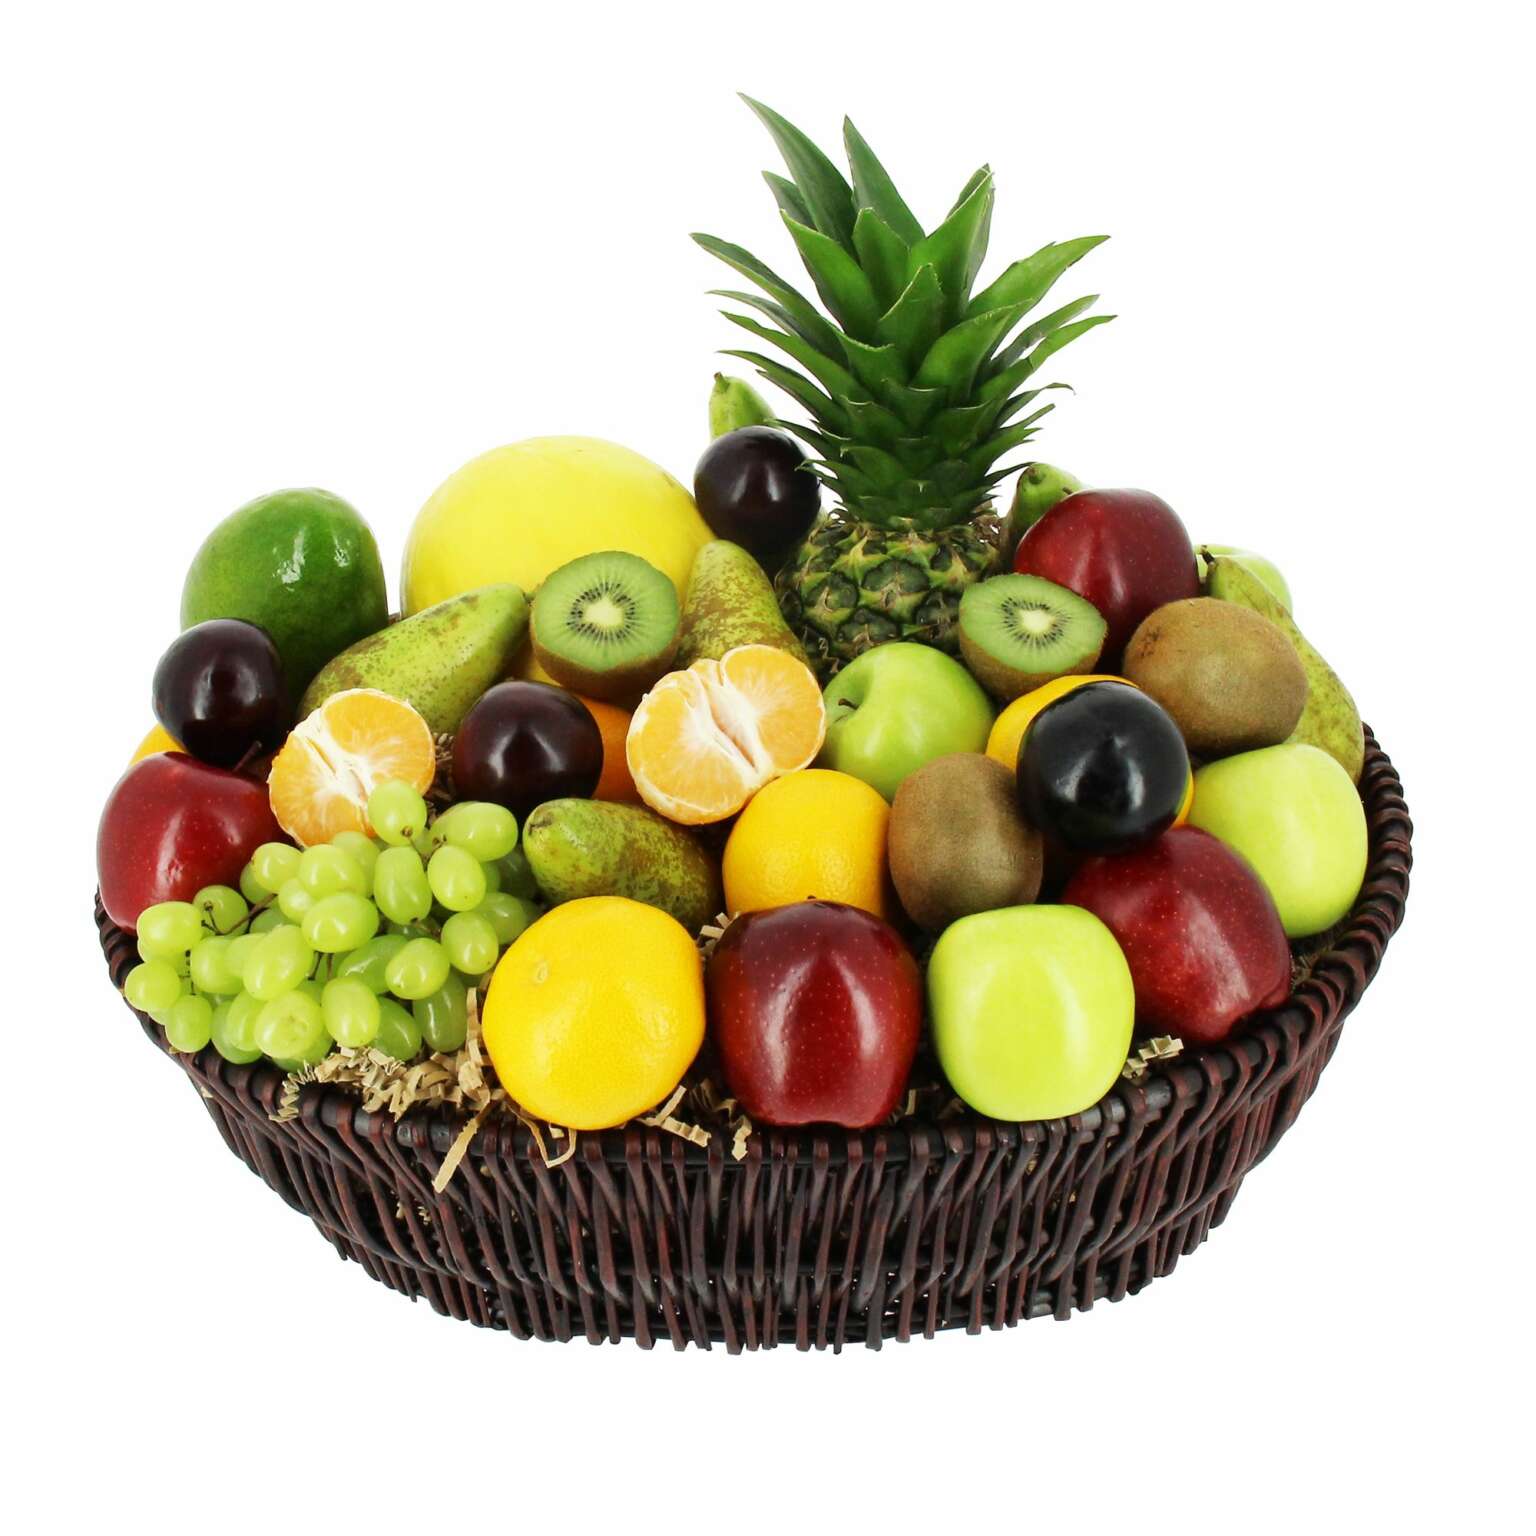 Benefits of giving a fruit basket as a gift | My Family Pedia